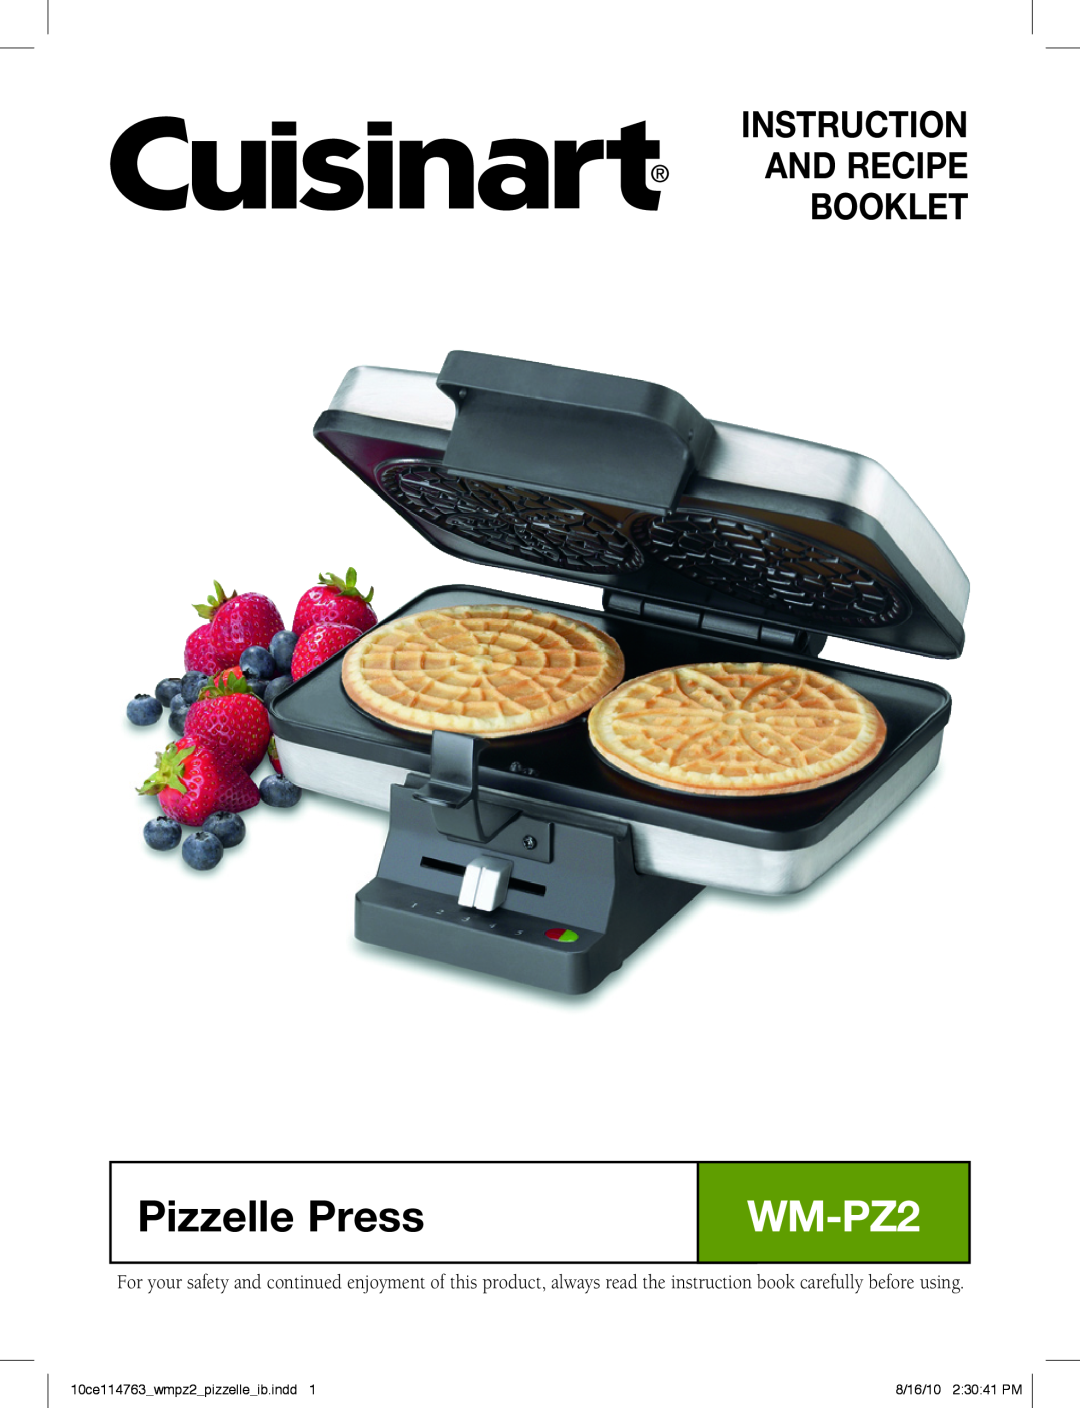 Cuisinart WM-PZ2 manual Pizzelle Press, Instruction And Recipe Booklet, 10ce114763 wmpz2 pizzelle ib.indd 